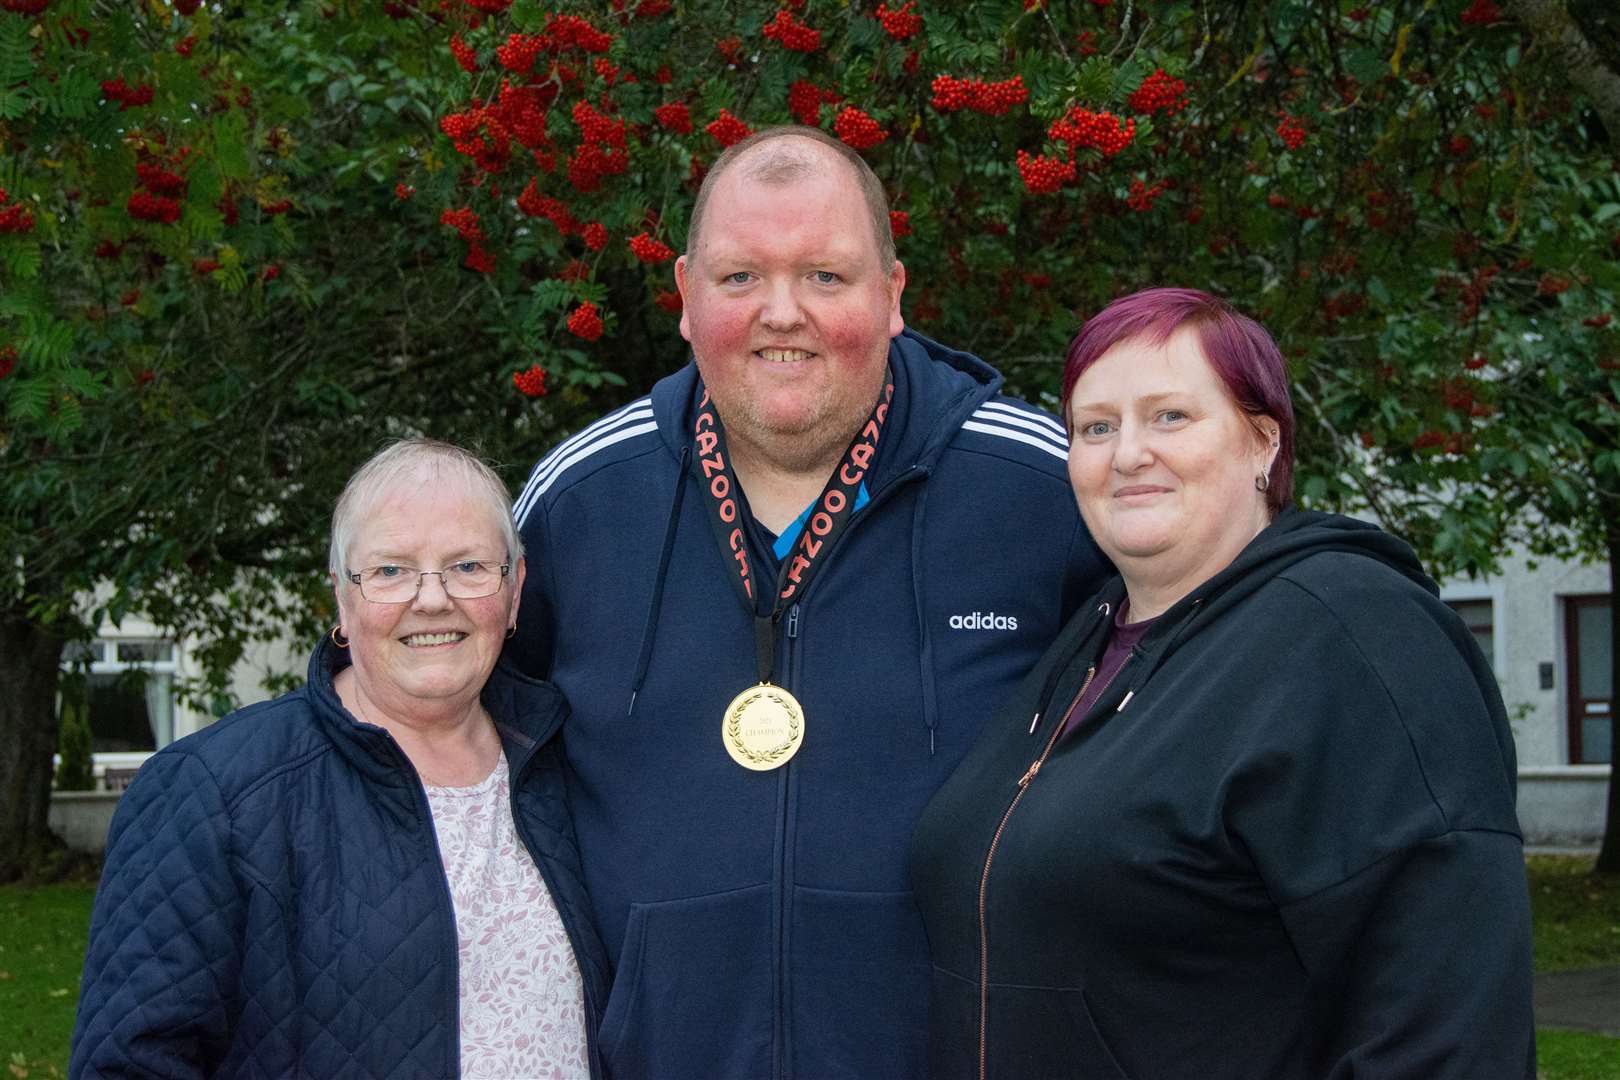 John Henderson with his wife Veronica and mum, Margaret.